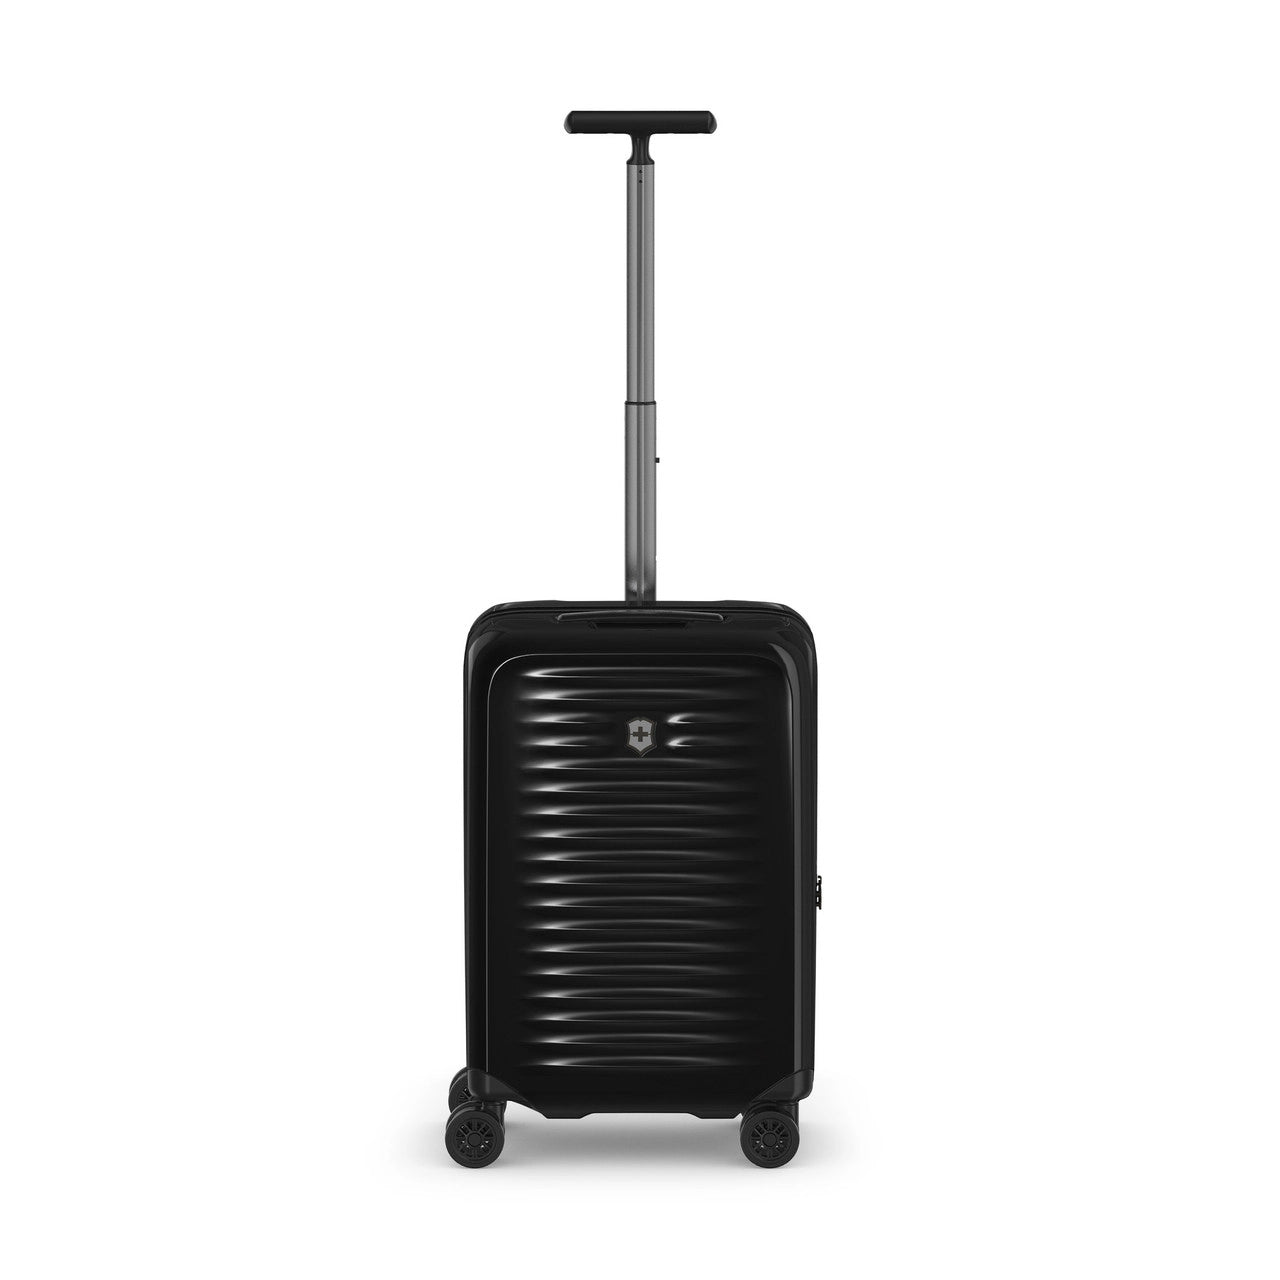 VICTORINOX AIROX FREQUENT FLYER CARRY-ON BLACK